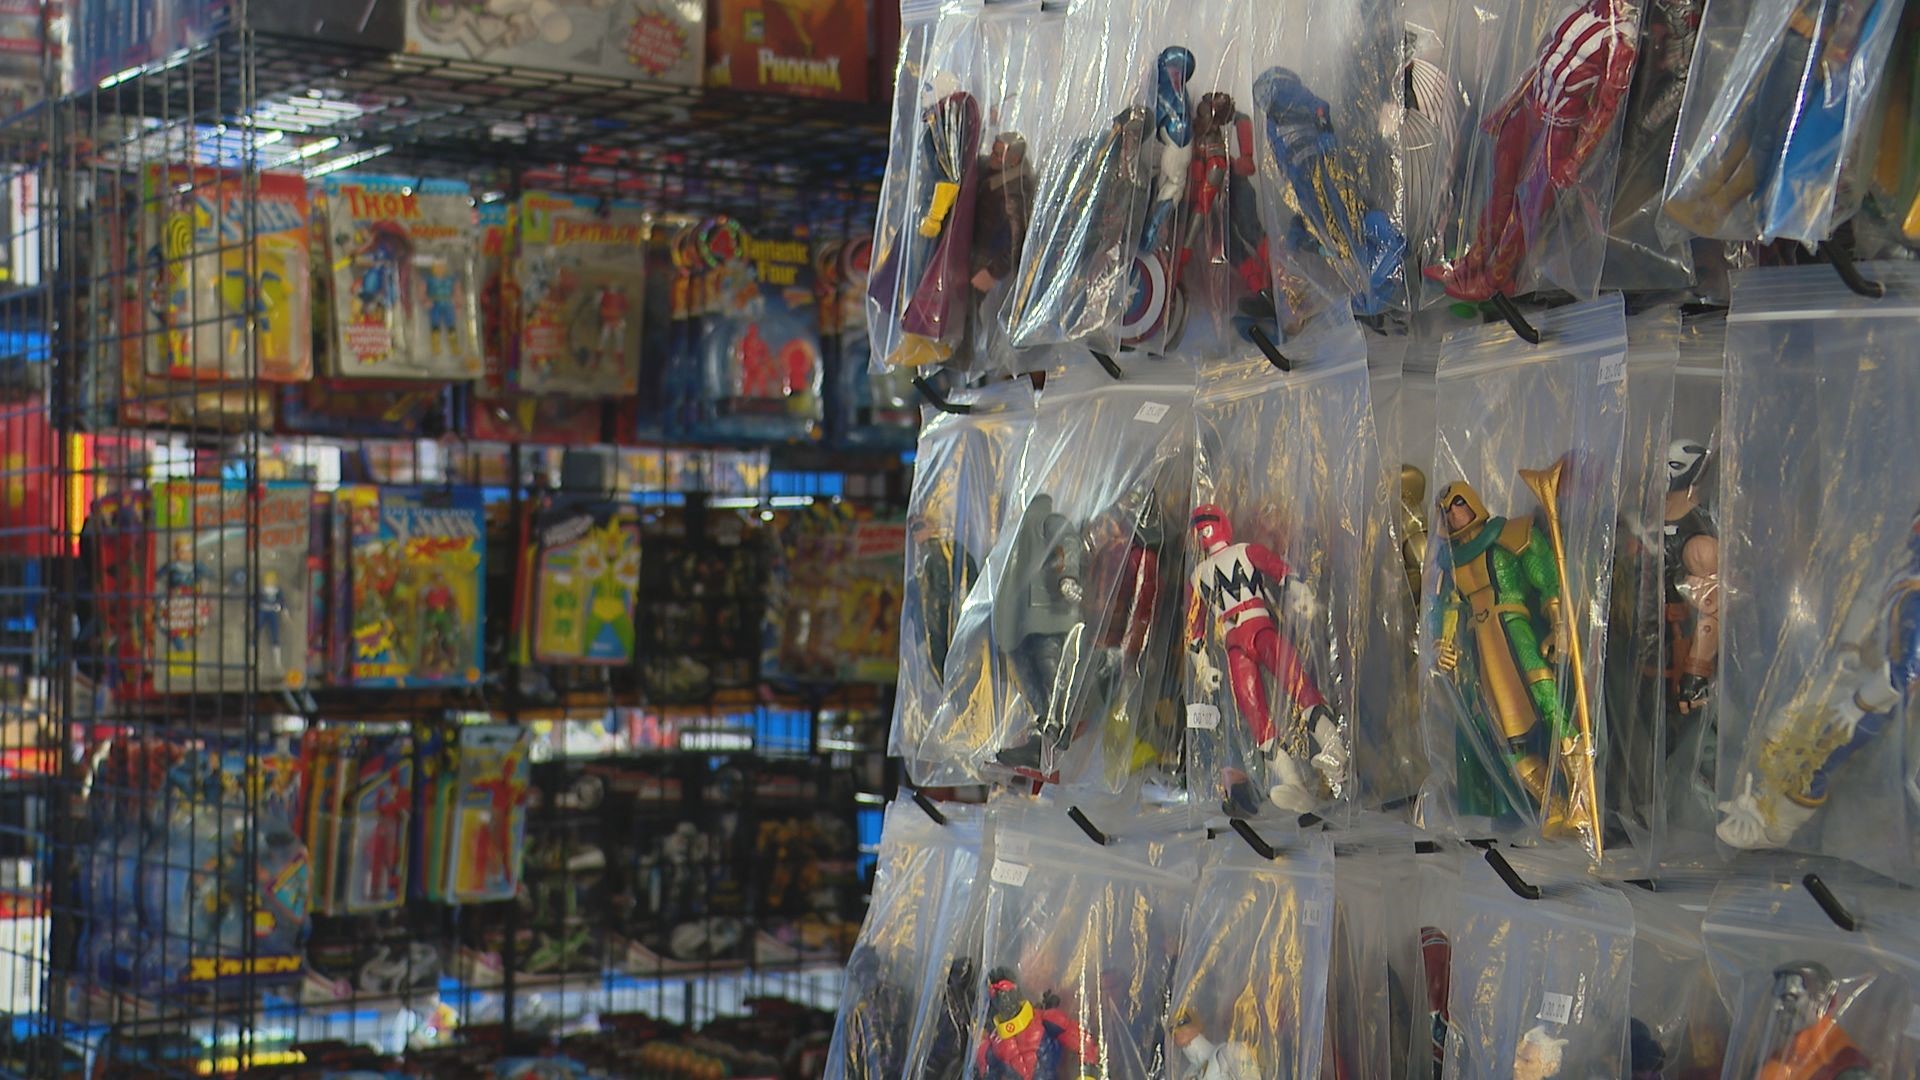 Toy Pit Indianapolis offers pop culture time travel with vintage toys